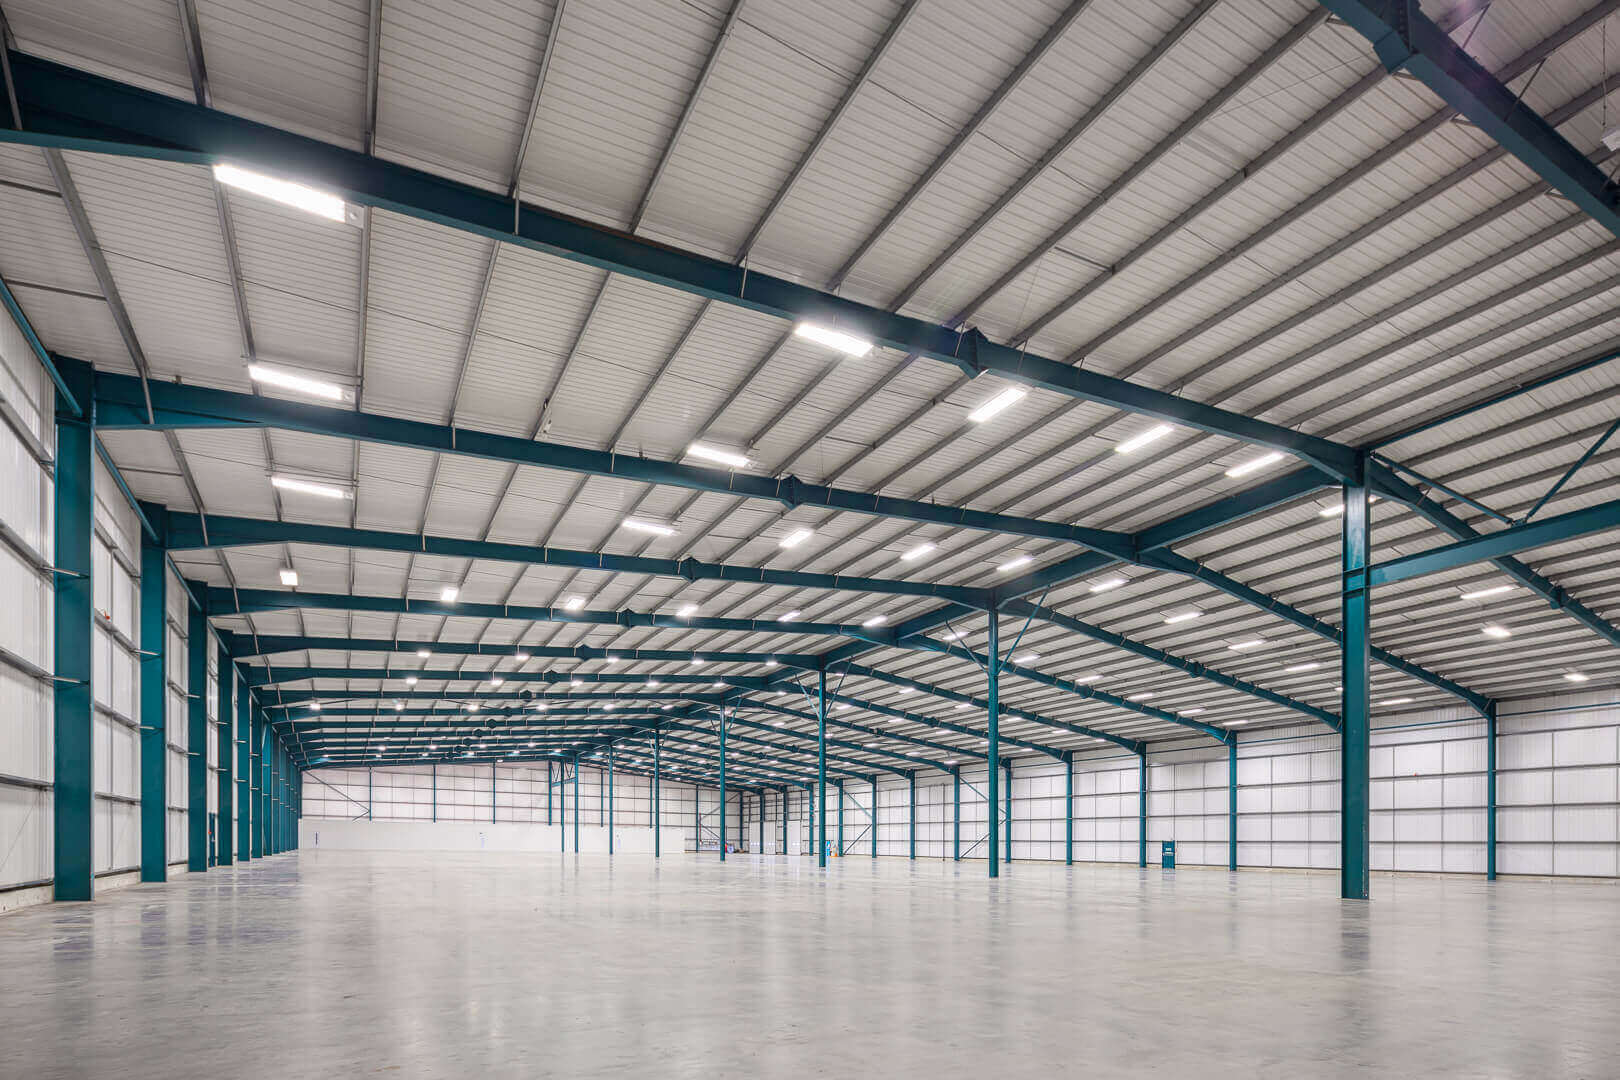 Commercial architecture and interior photography - Howley Lane Industrial Park, Warrington